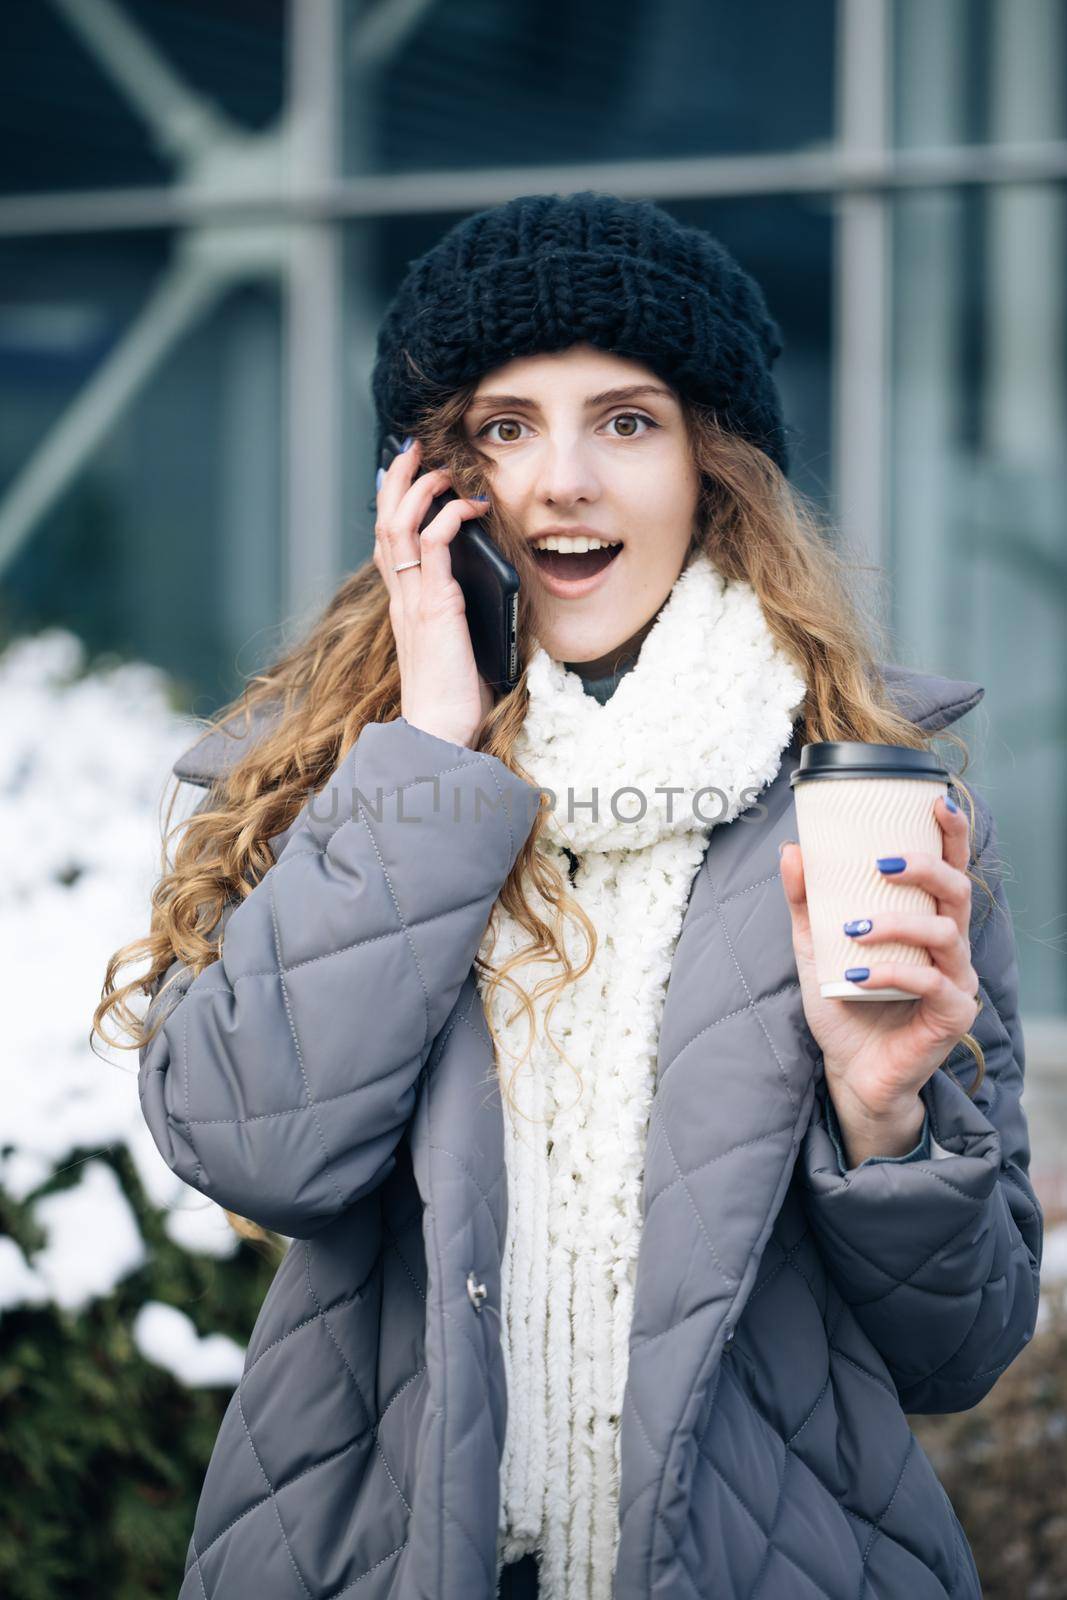 Young girl talking on her mobile phone while walking in the city street. Woman using her smartphone and holding paper cup with coffee.